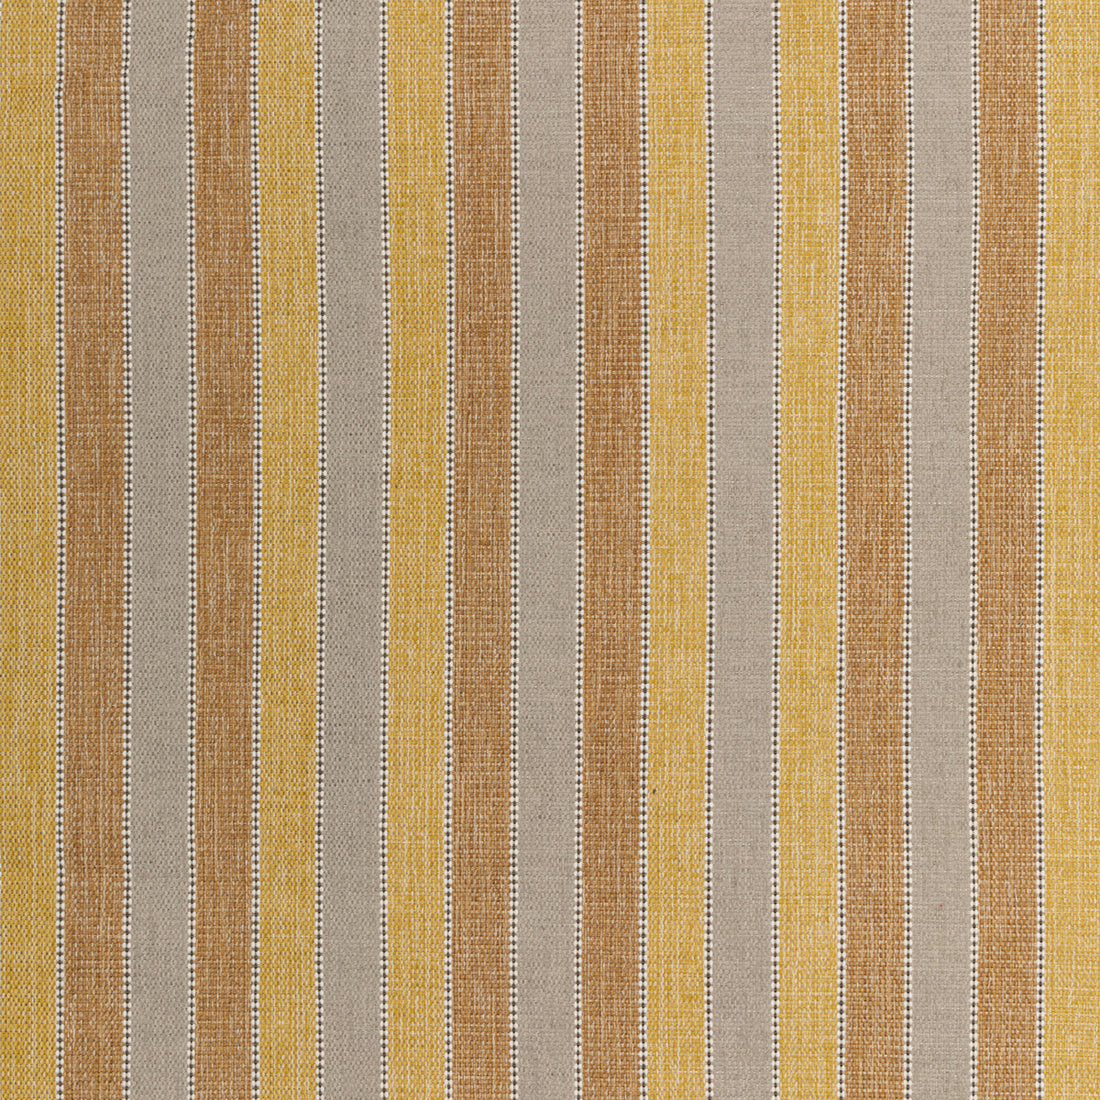 Walkway fabric in goldenrod color - pattern 36278.4.0 - by Kravet Contract in the Gis Crypton collection